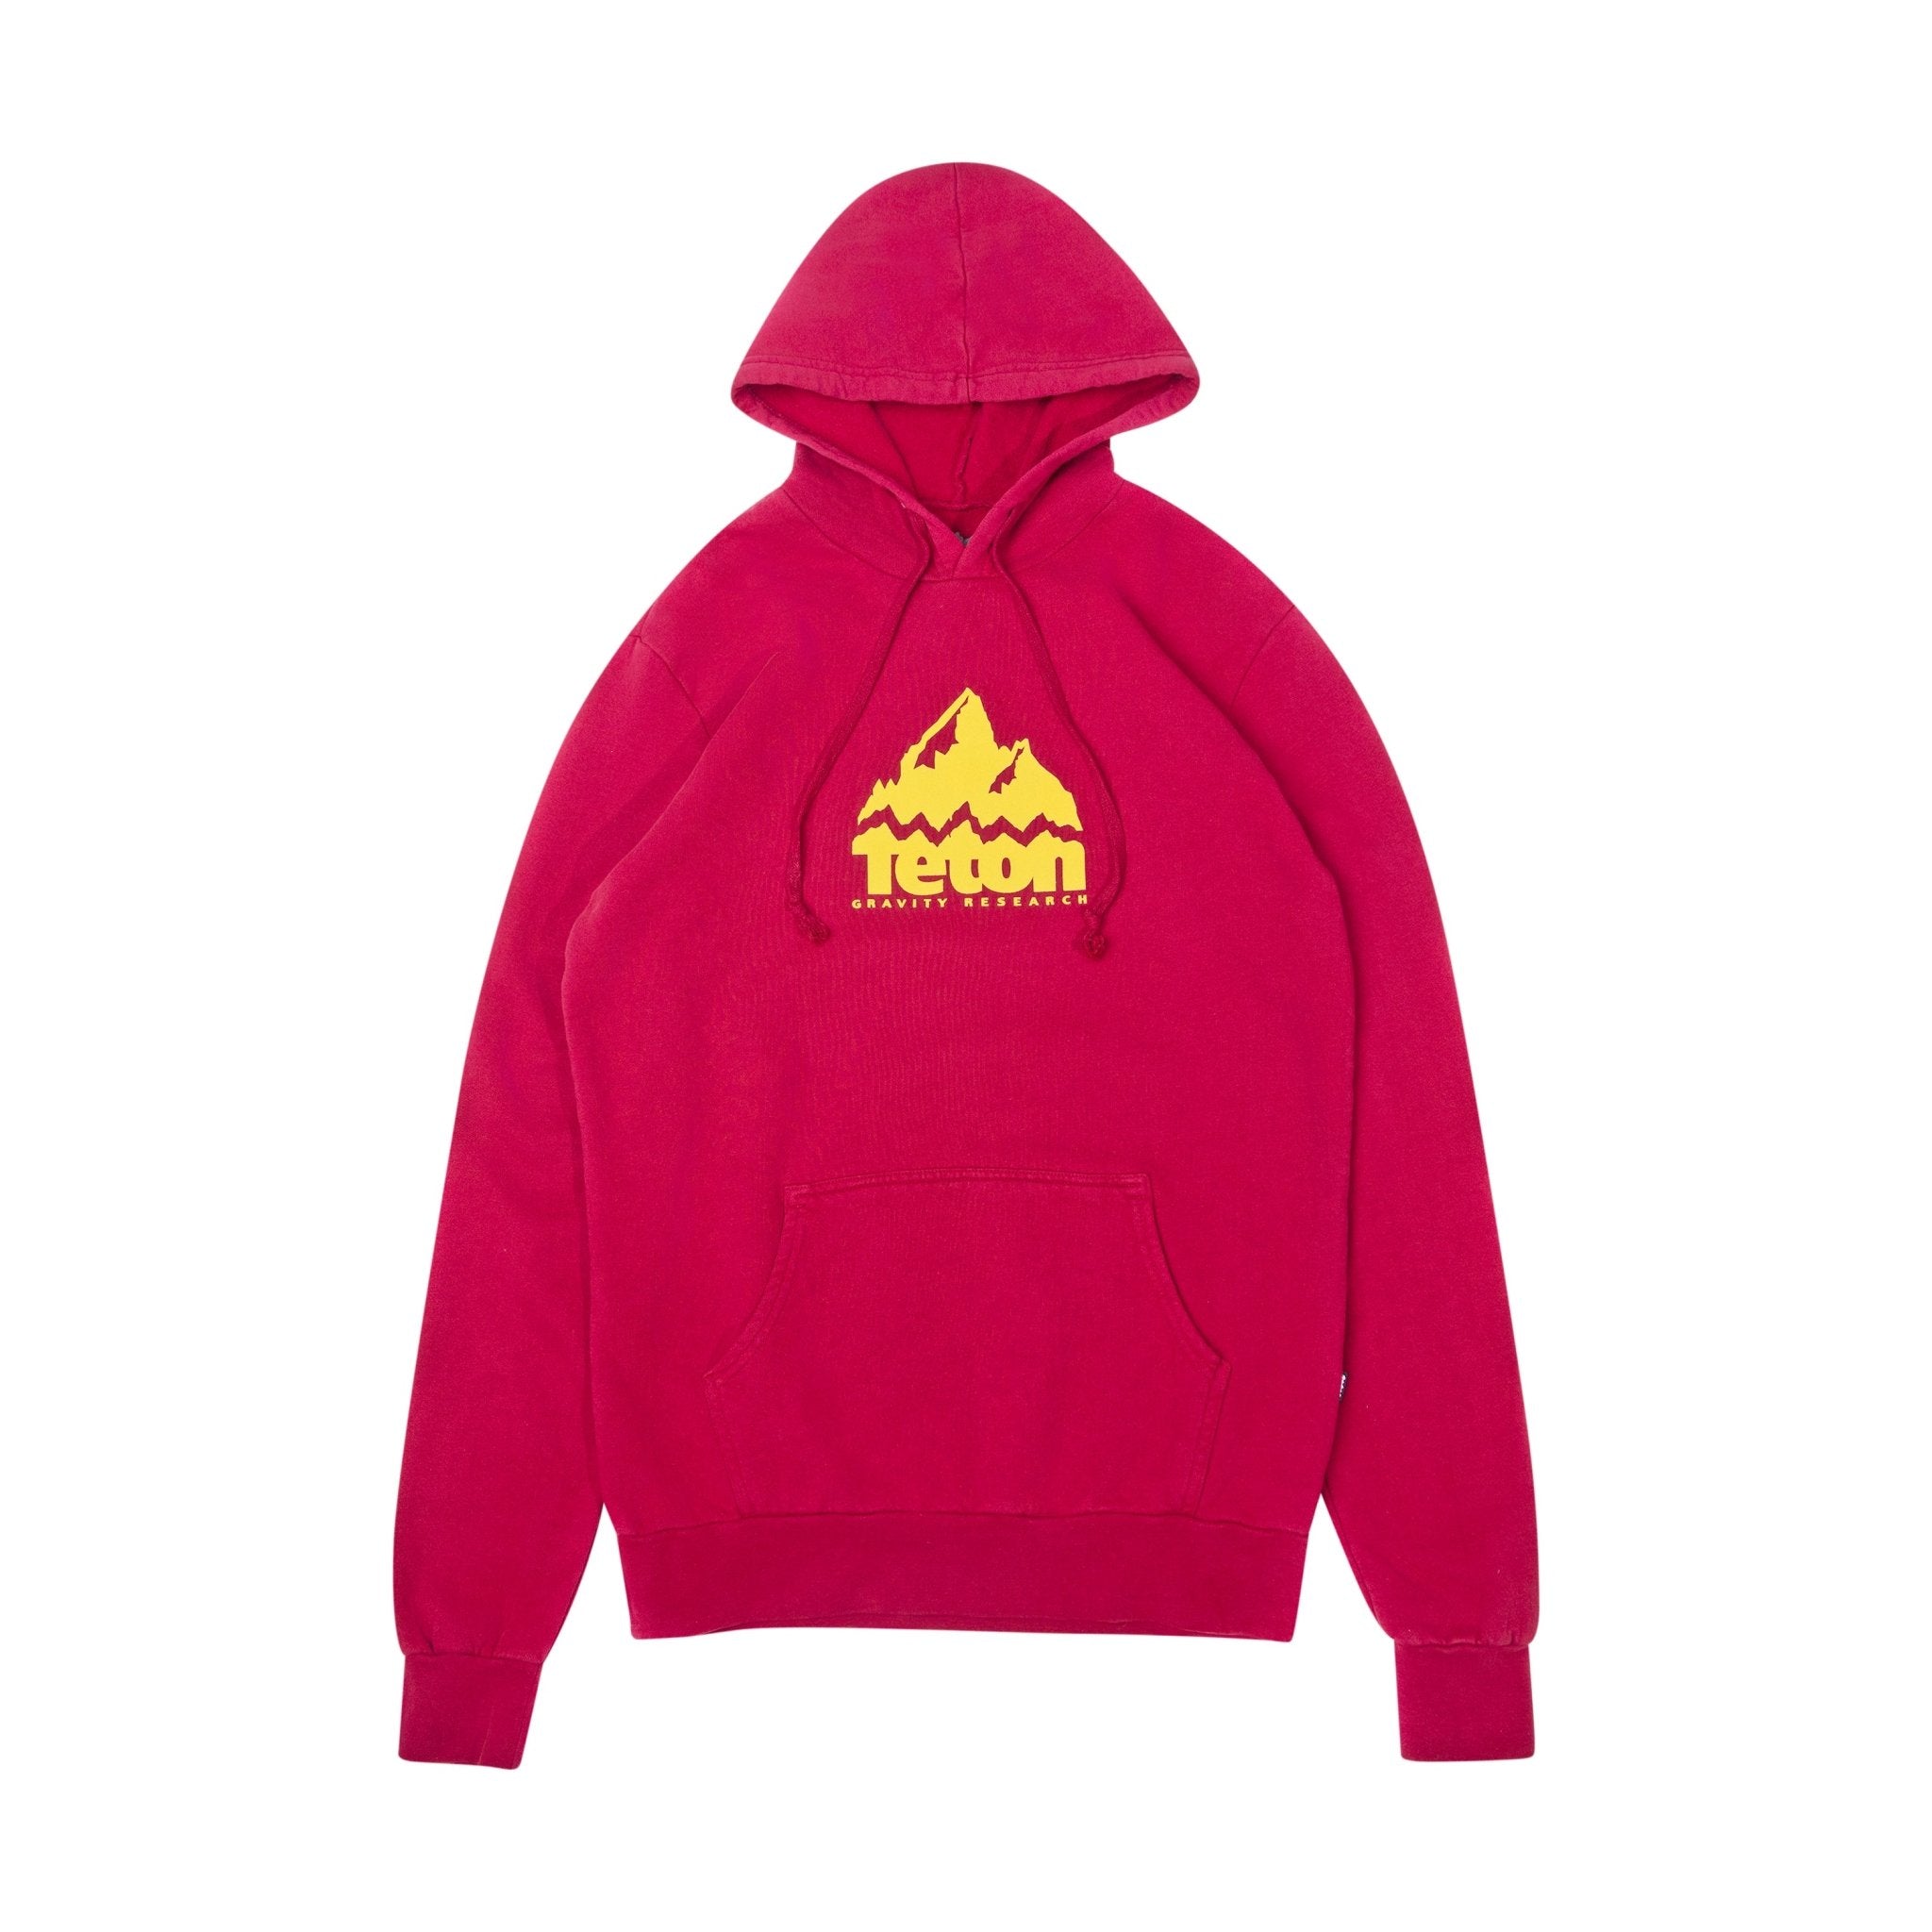 Grand Logo Hoodie 2.0 with the Teton Gravity Rsearch logo on the chest in yellow. #color_maroon